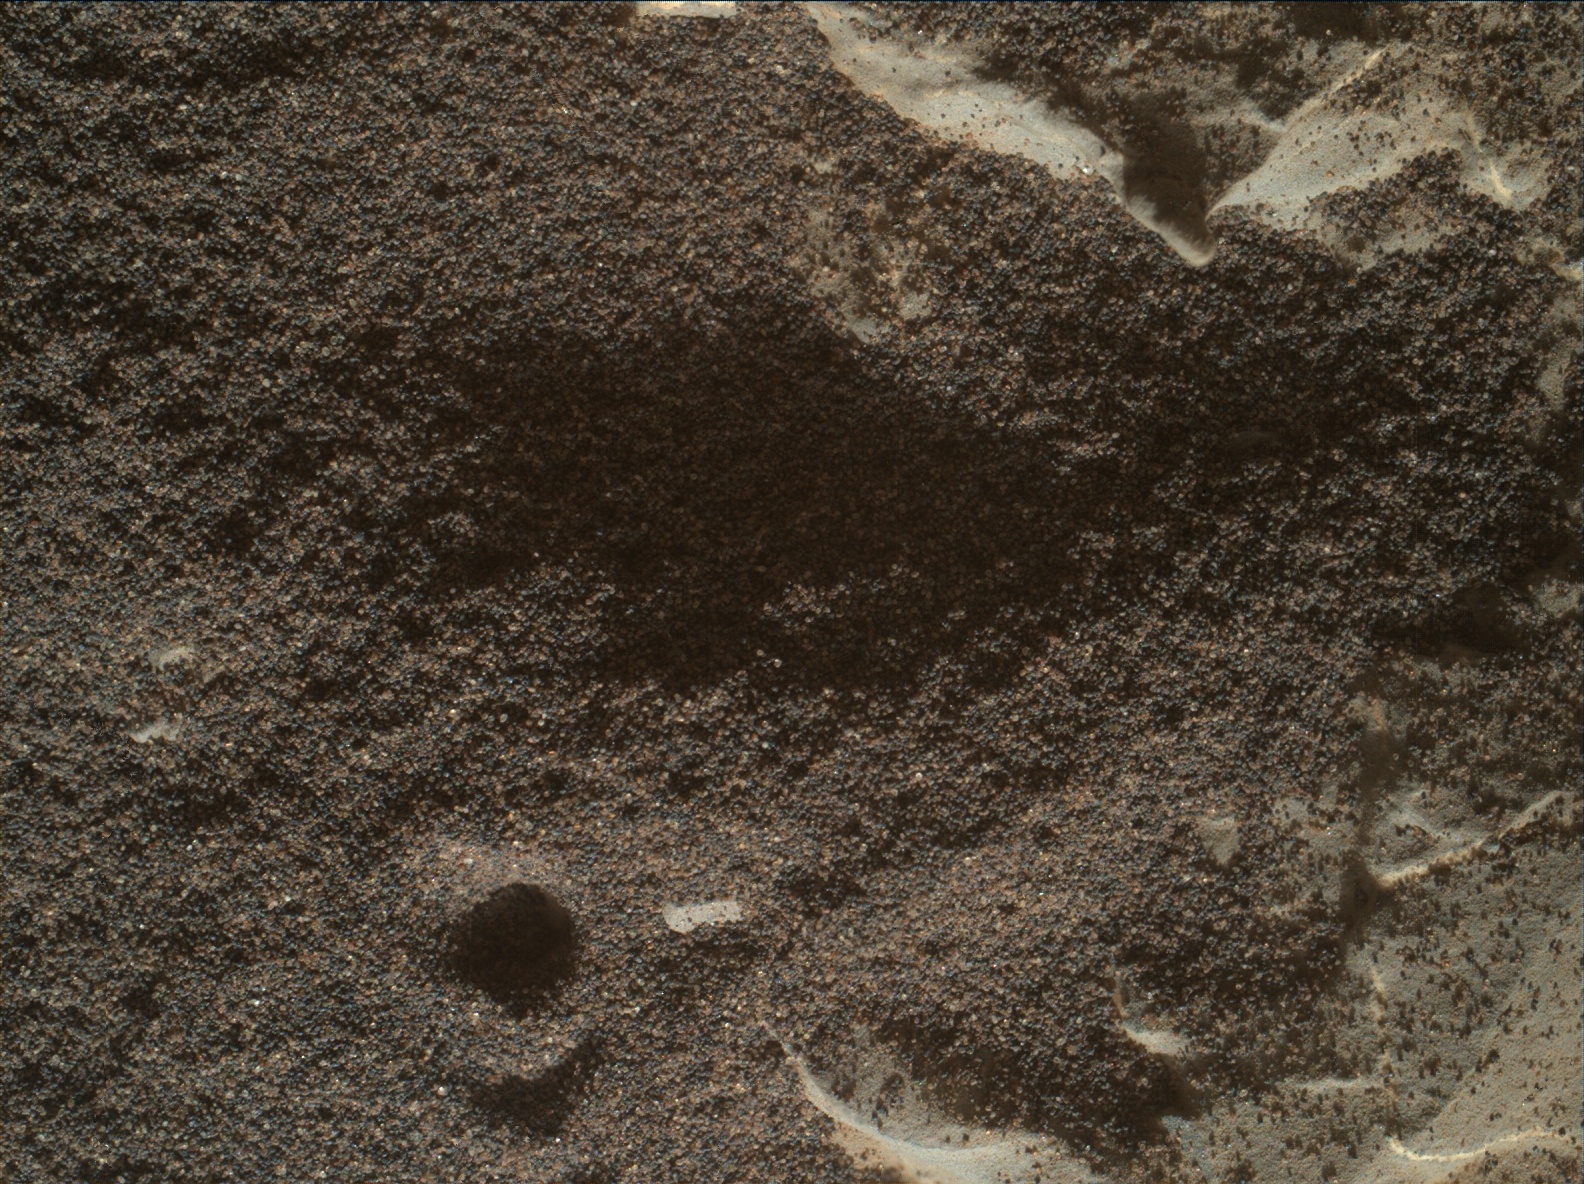 Nasa's Mars rover Curiosity acquired this image using its Mars Hand Lens Imager (MAHLI) on Sol 1971